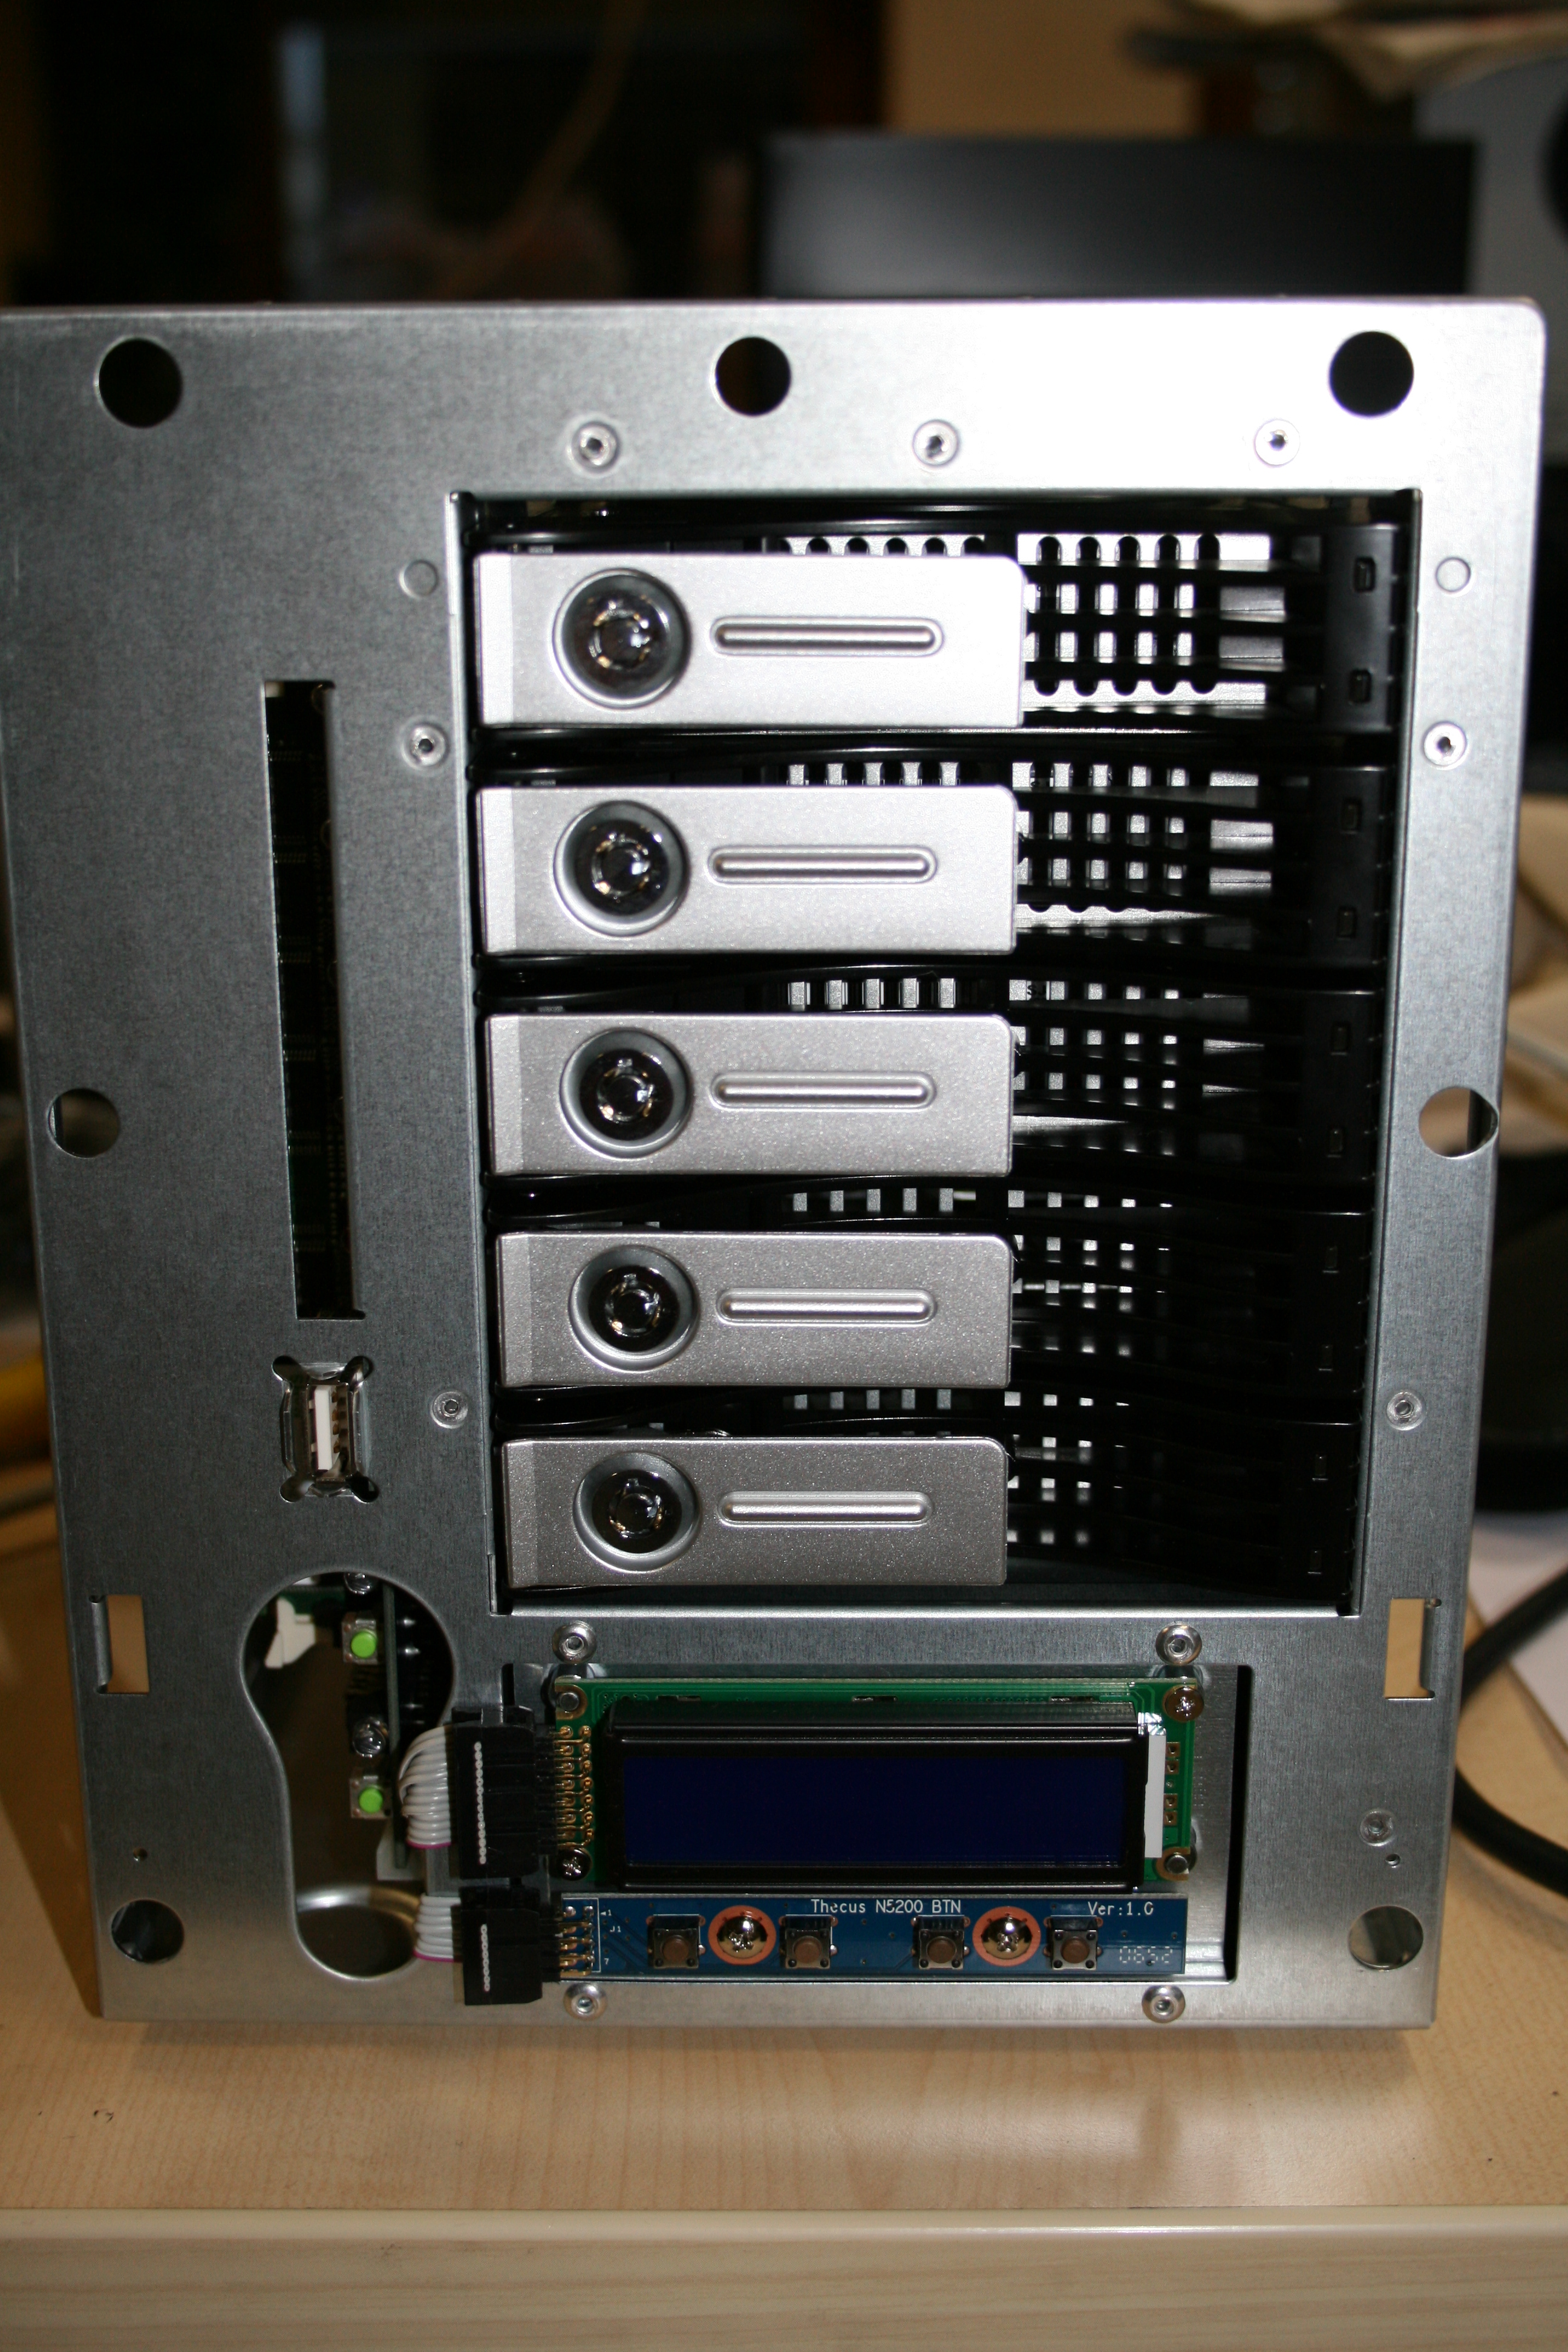 frontside of the Thecus 5200 Pro without the hood